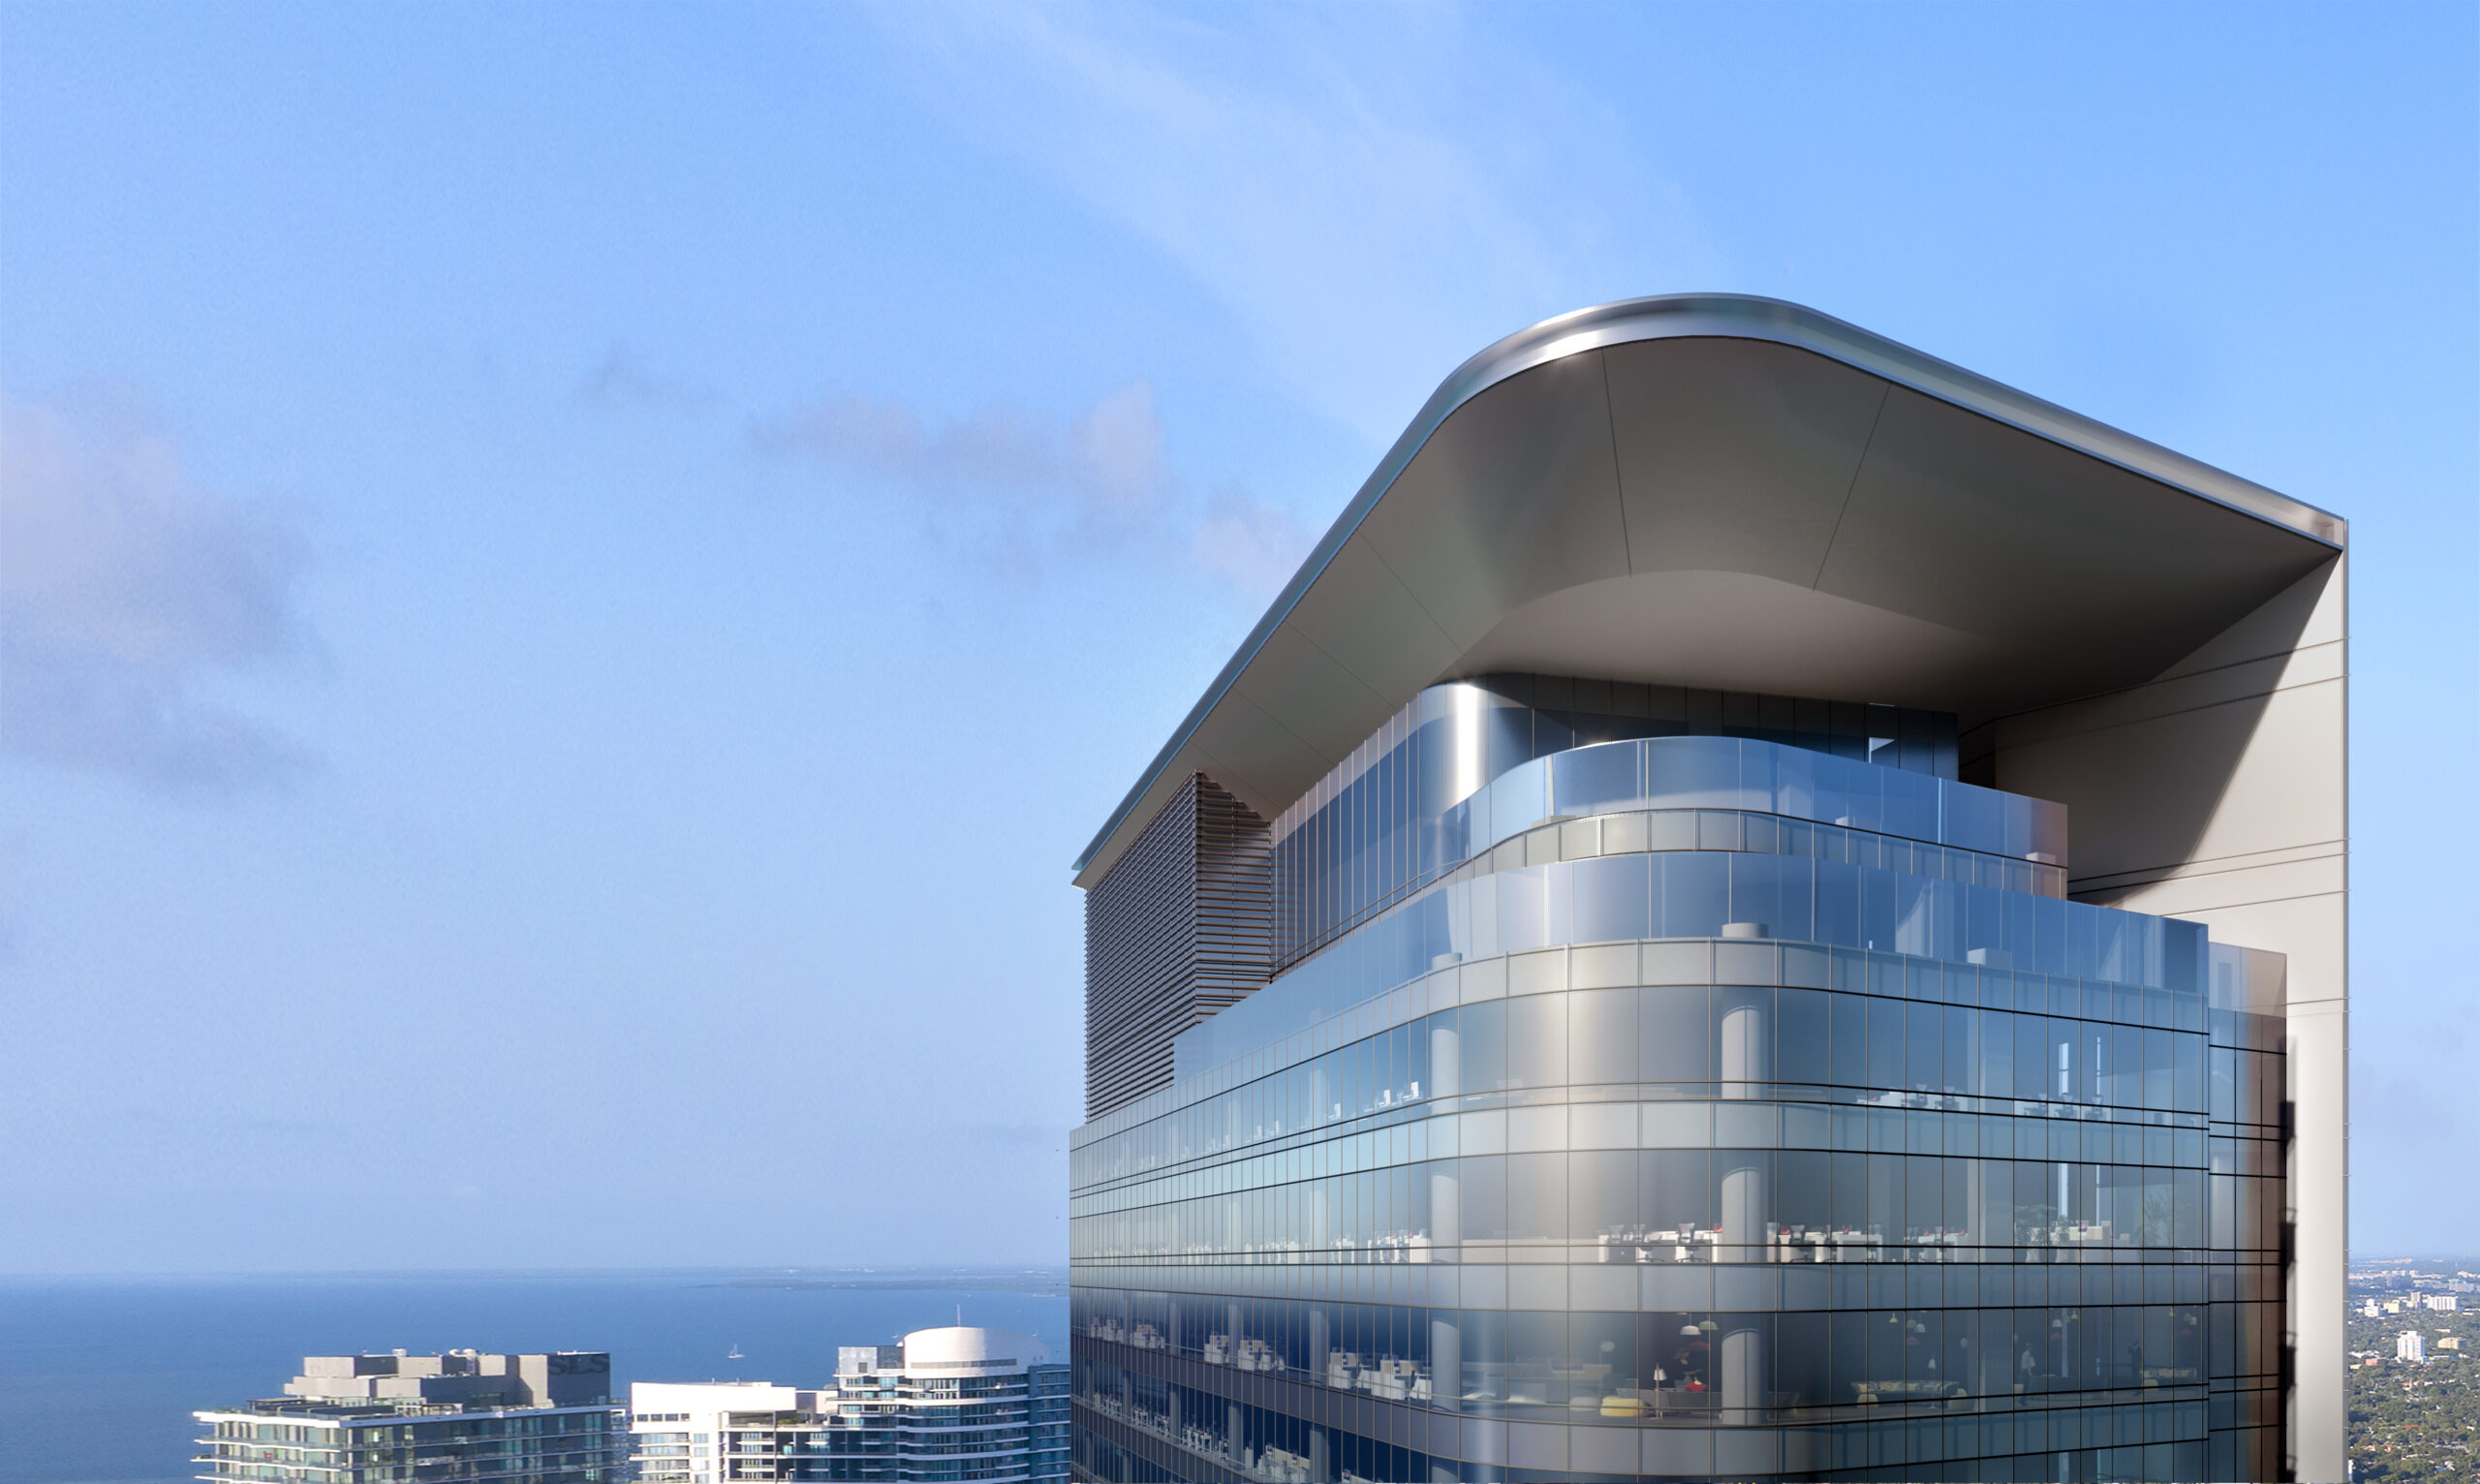 Winston & Strawn, Baker McKenzie Sign Leases at 830 Brickell: ‘We Are Committed to Miami’